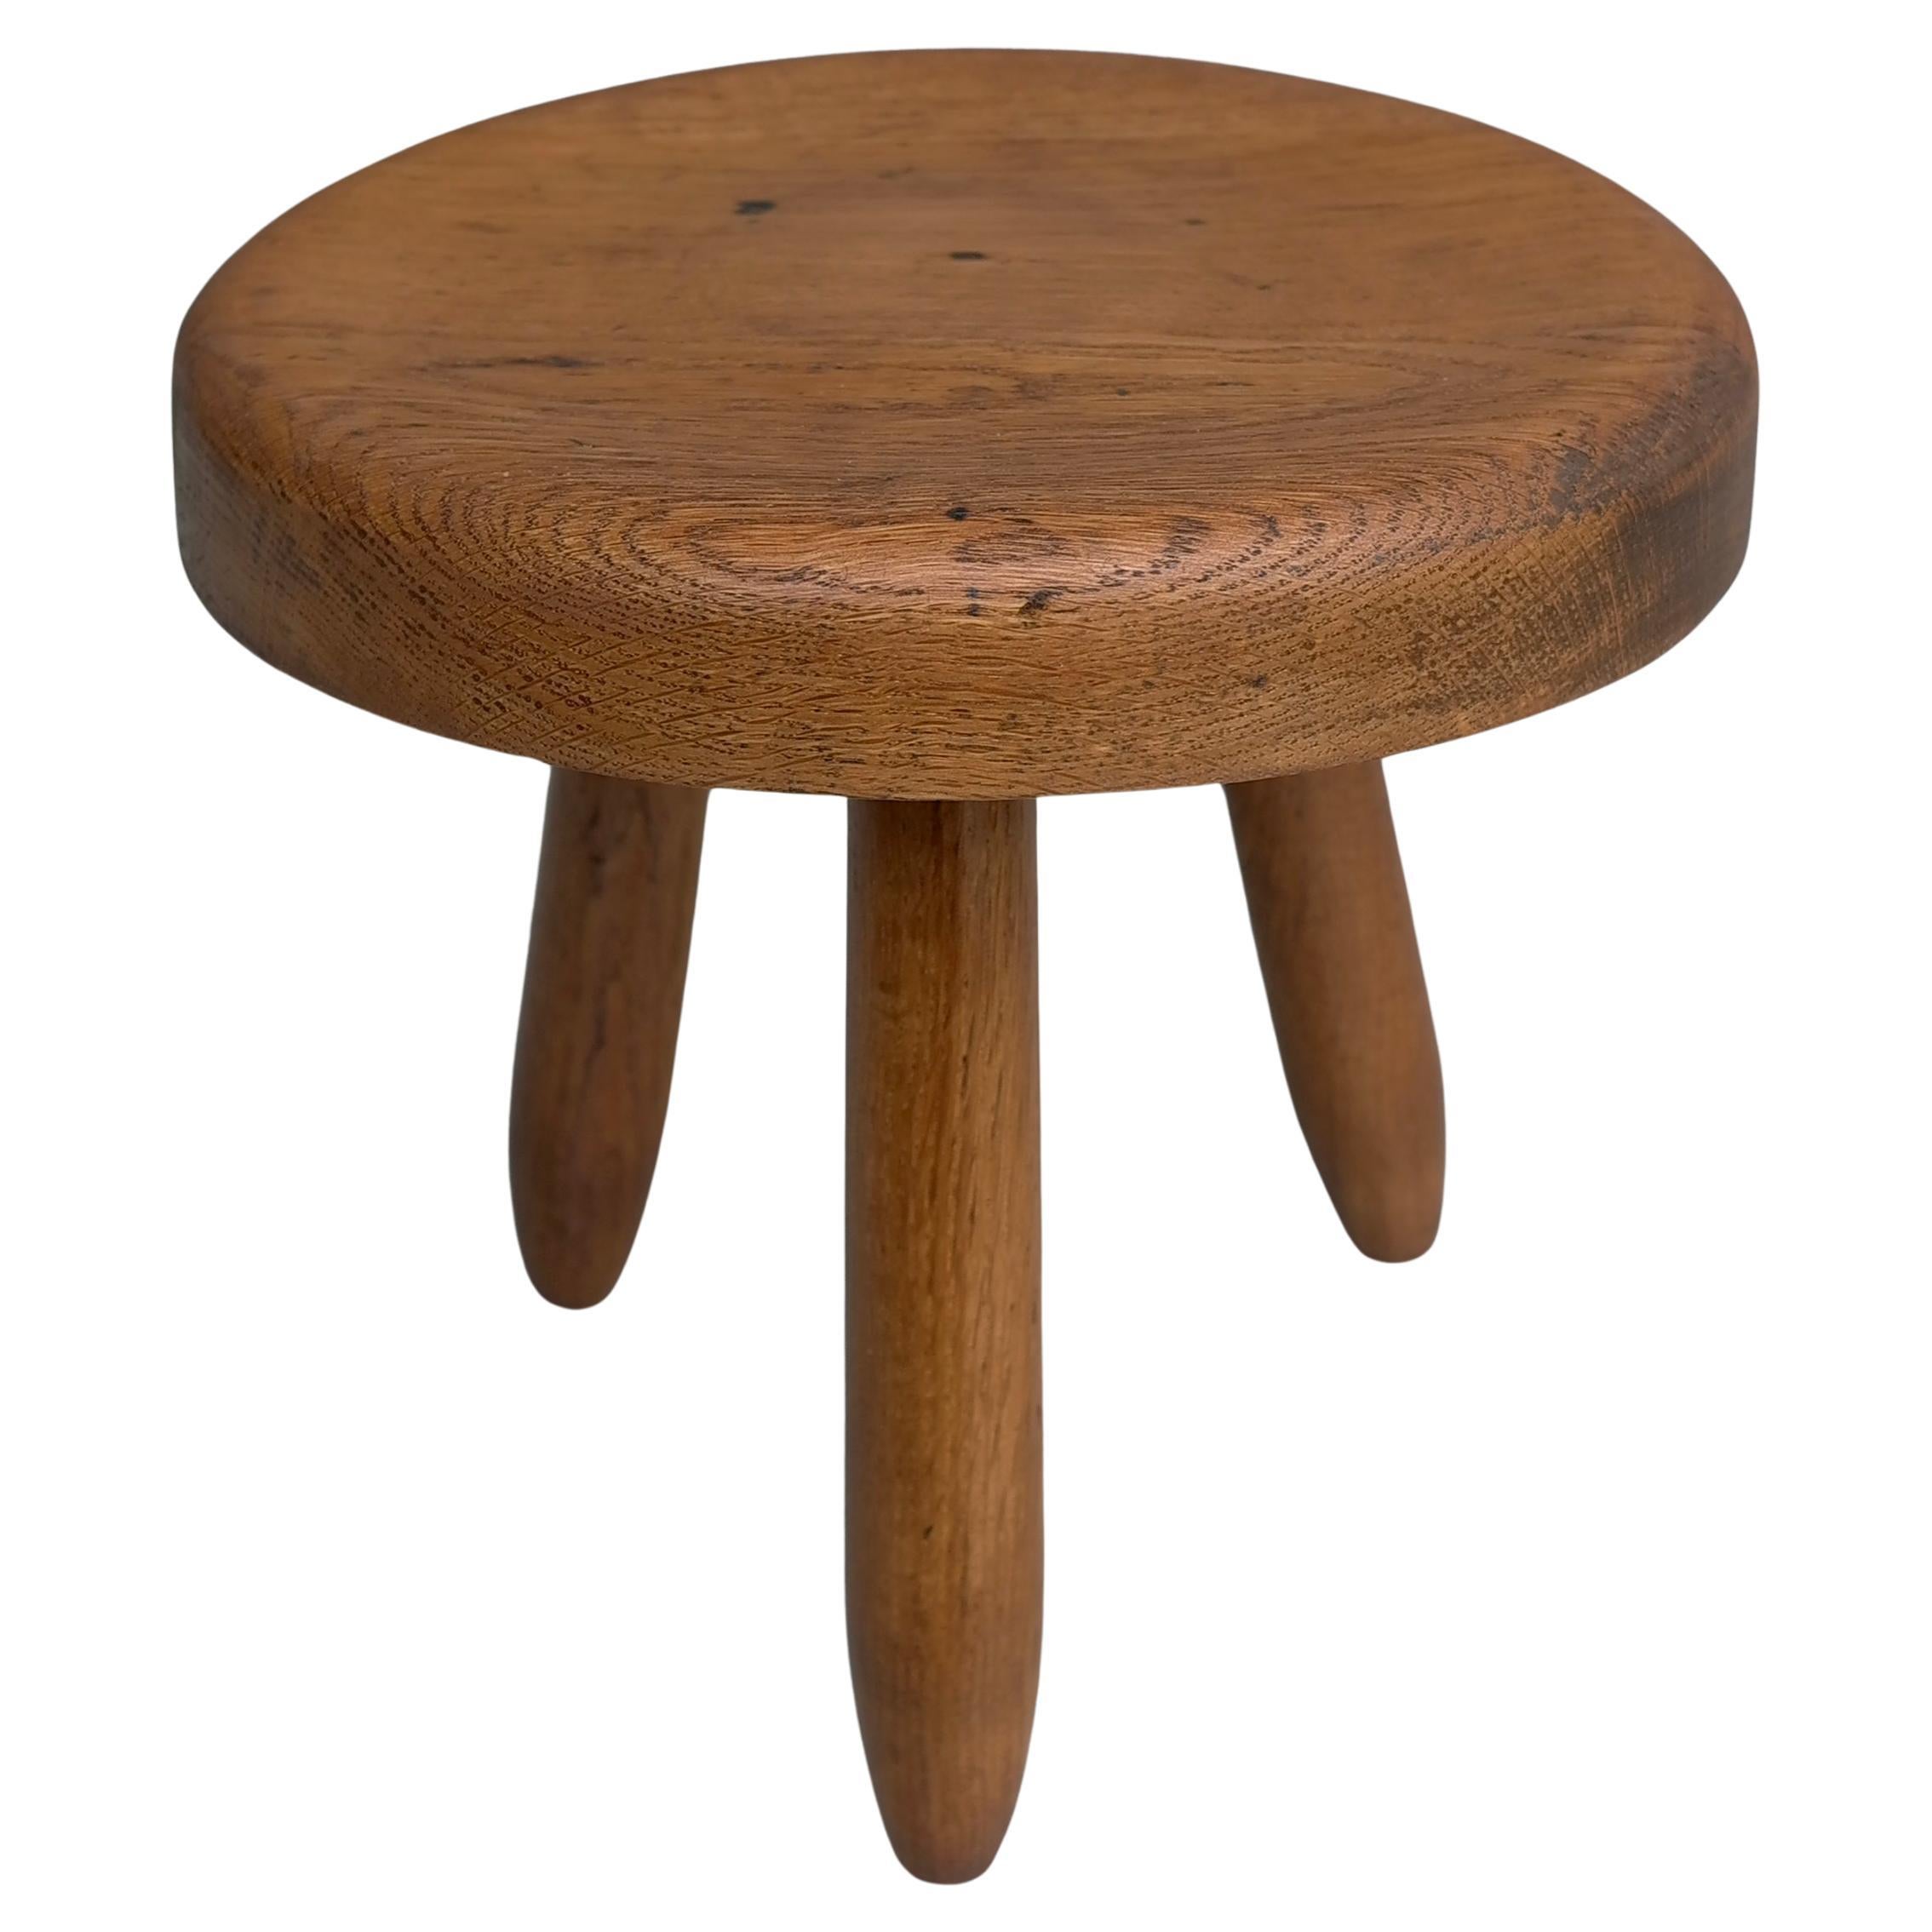 Solid Oak ' Berger' Stool in Style of Charlotte Perriand, France, 1950's For Sale